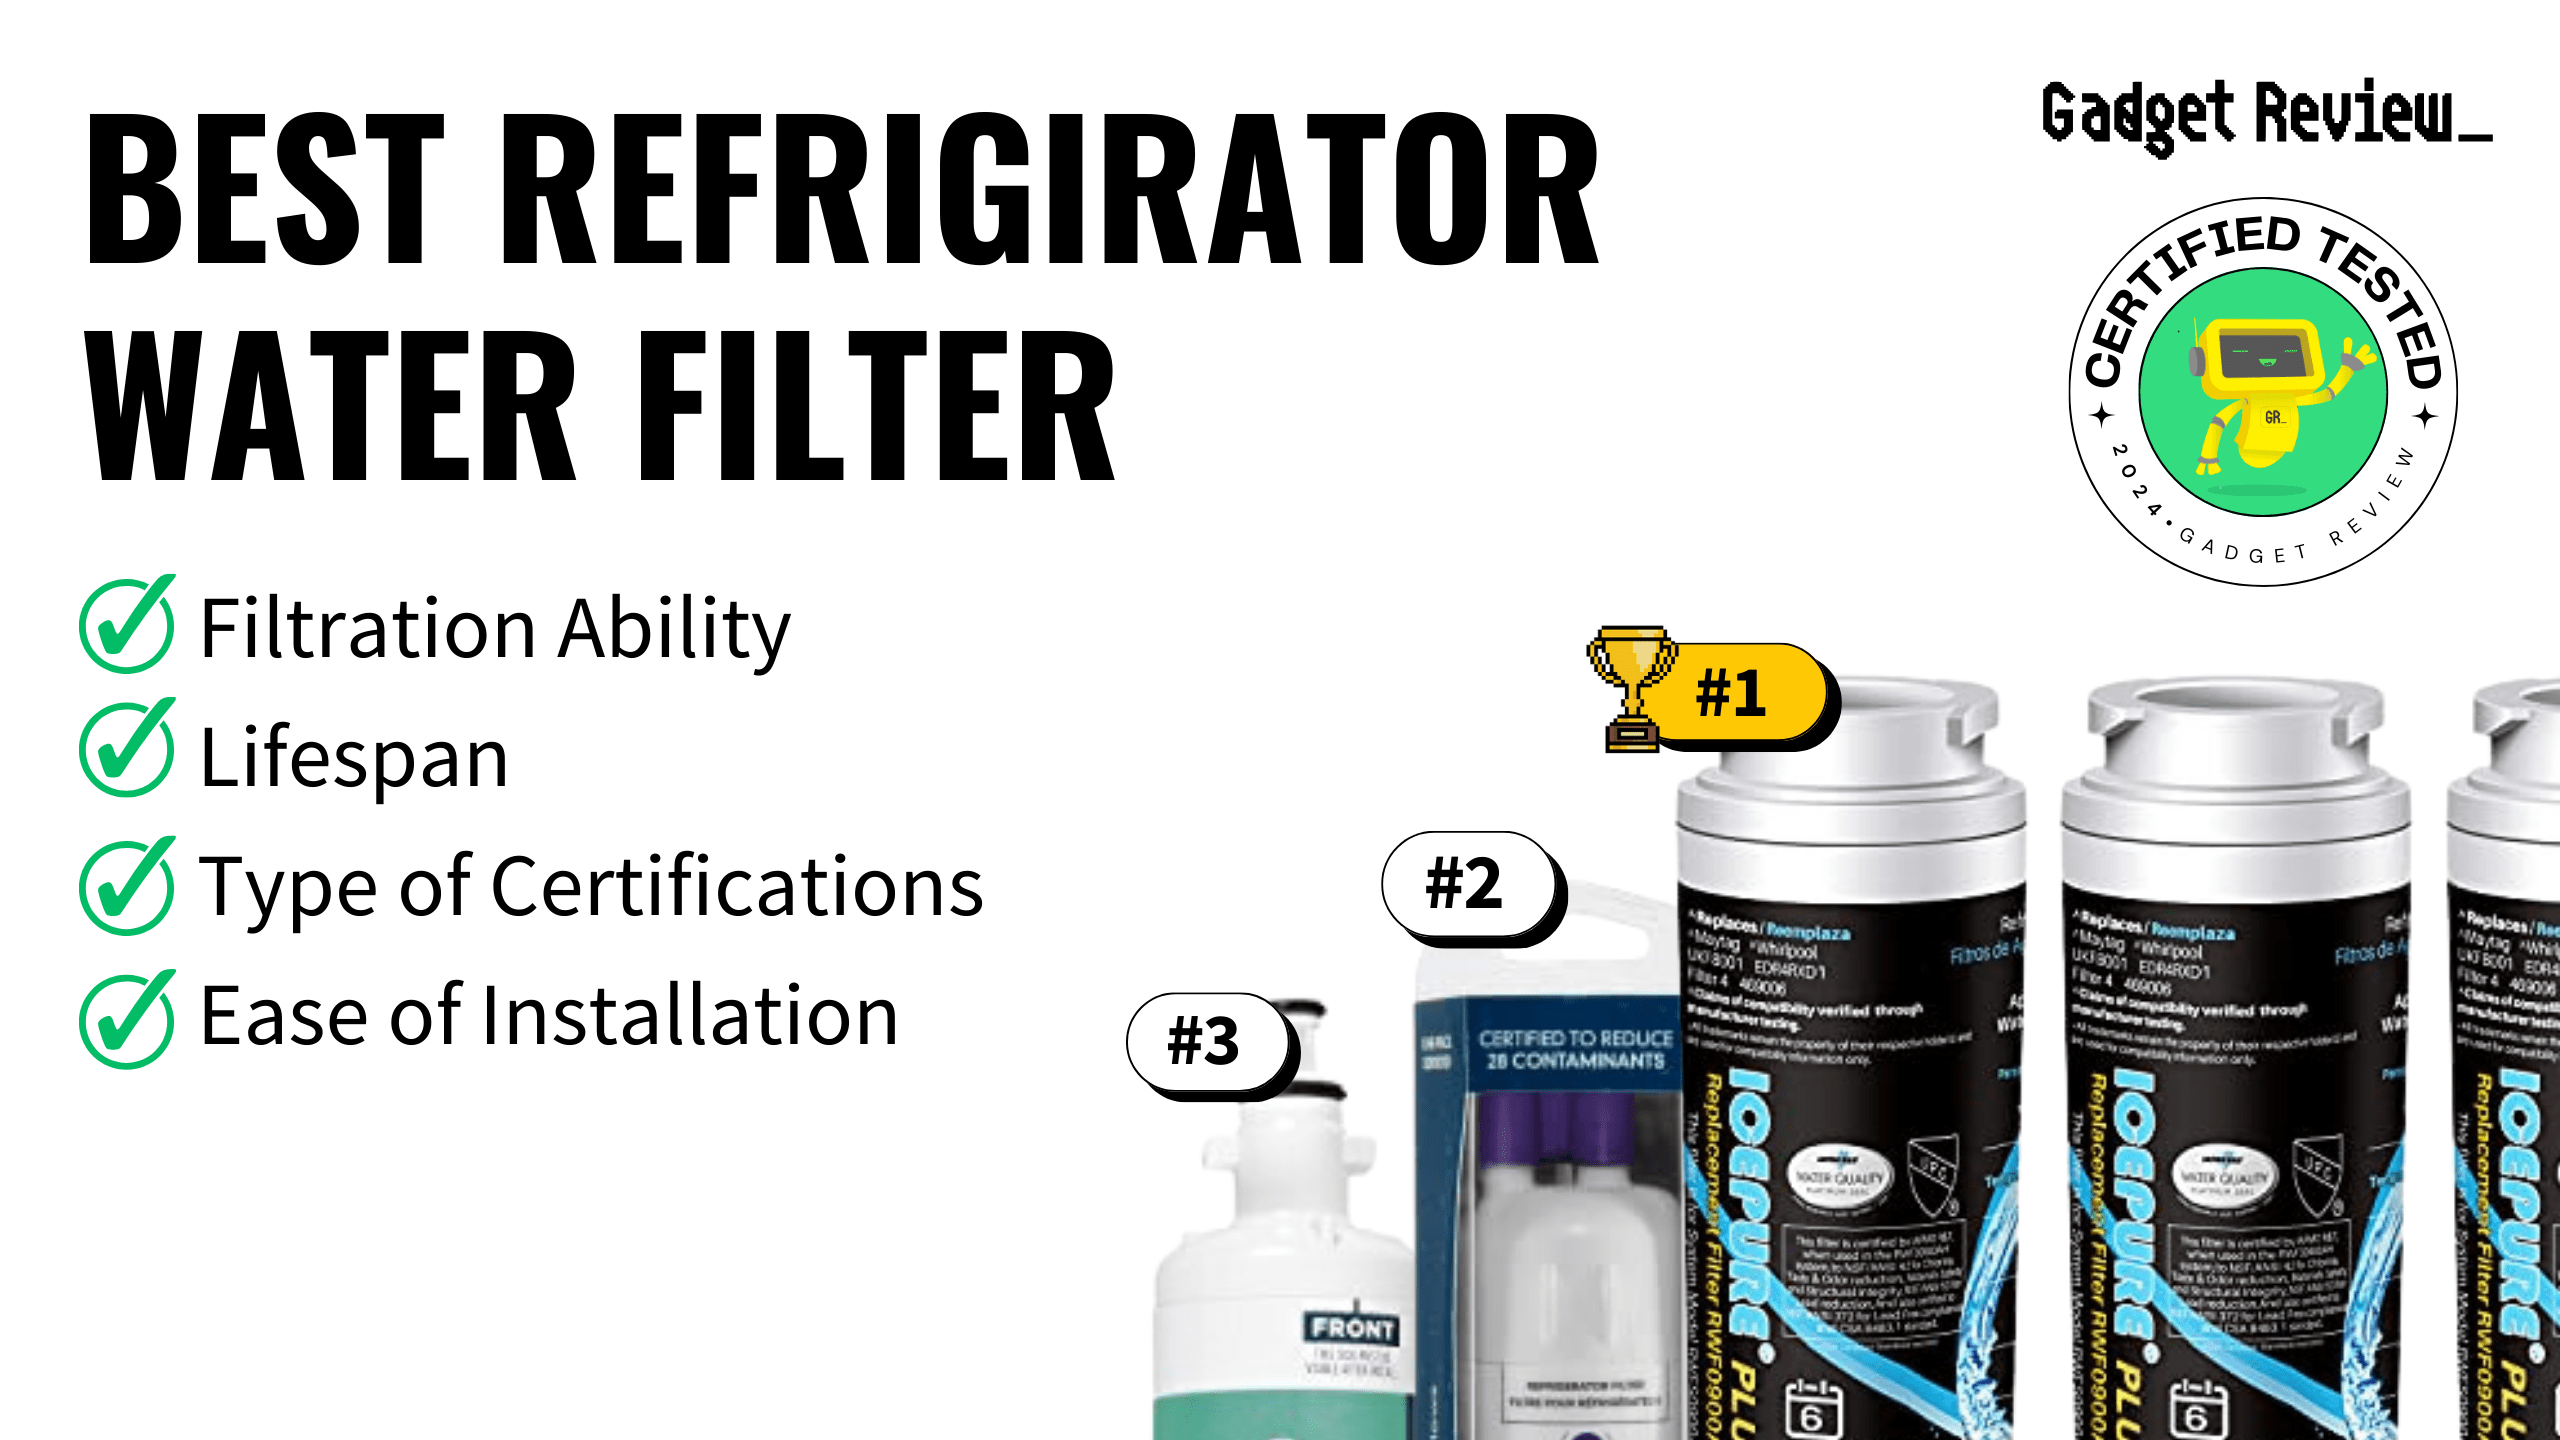 best refrigerator water filter guide that shows the top best refrigerator model